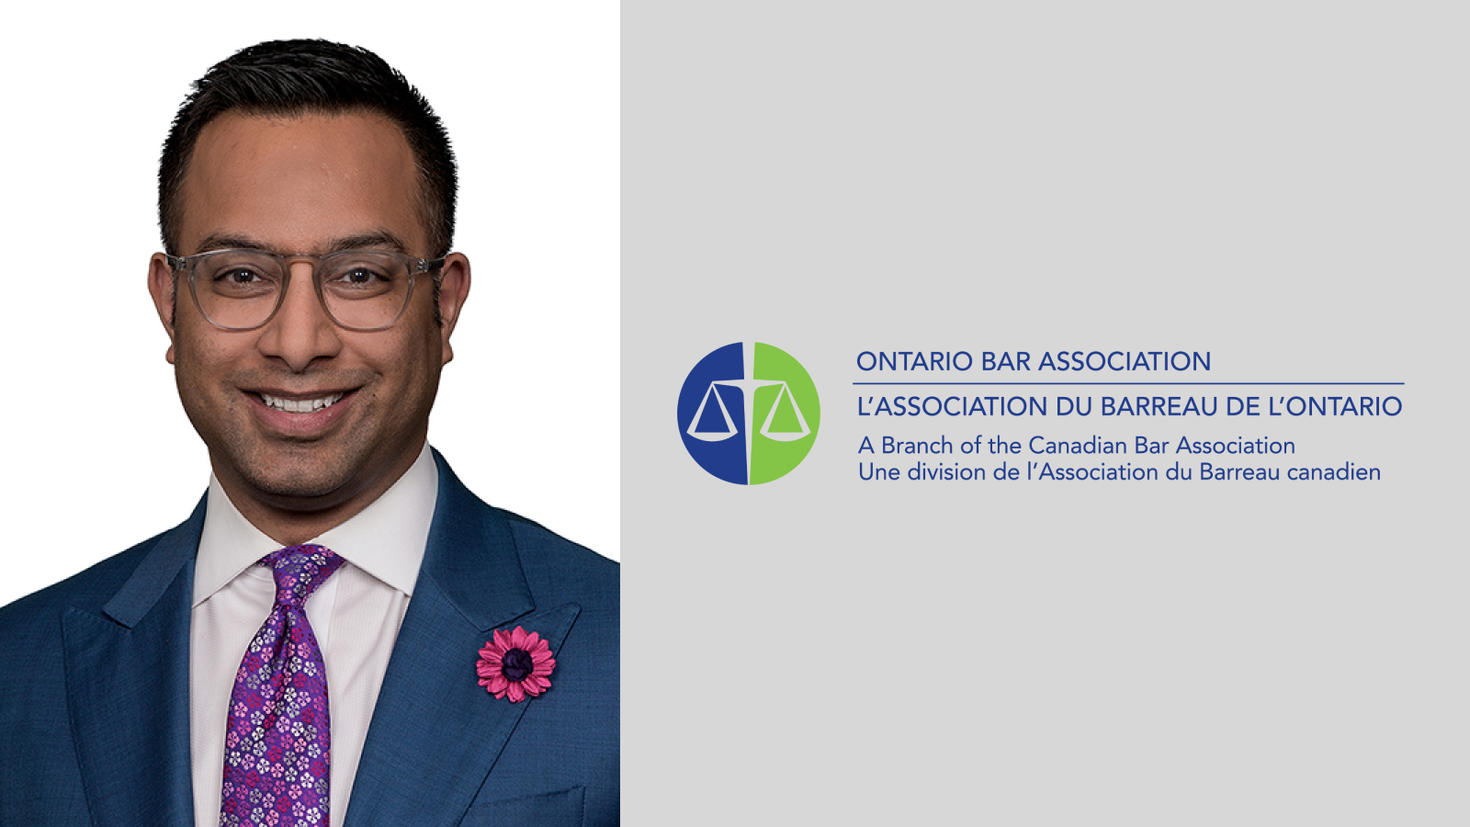 Ranjan Agarwal, LLB ’03, elected to the Ontario Bar Association’s Board as second vice president